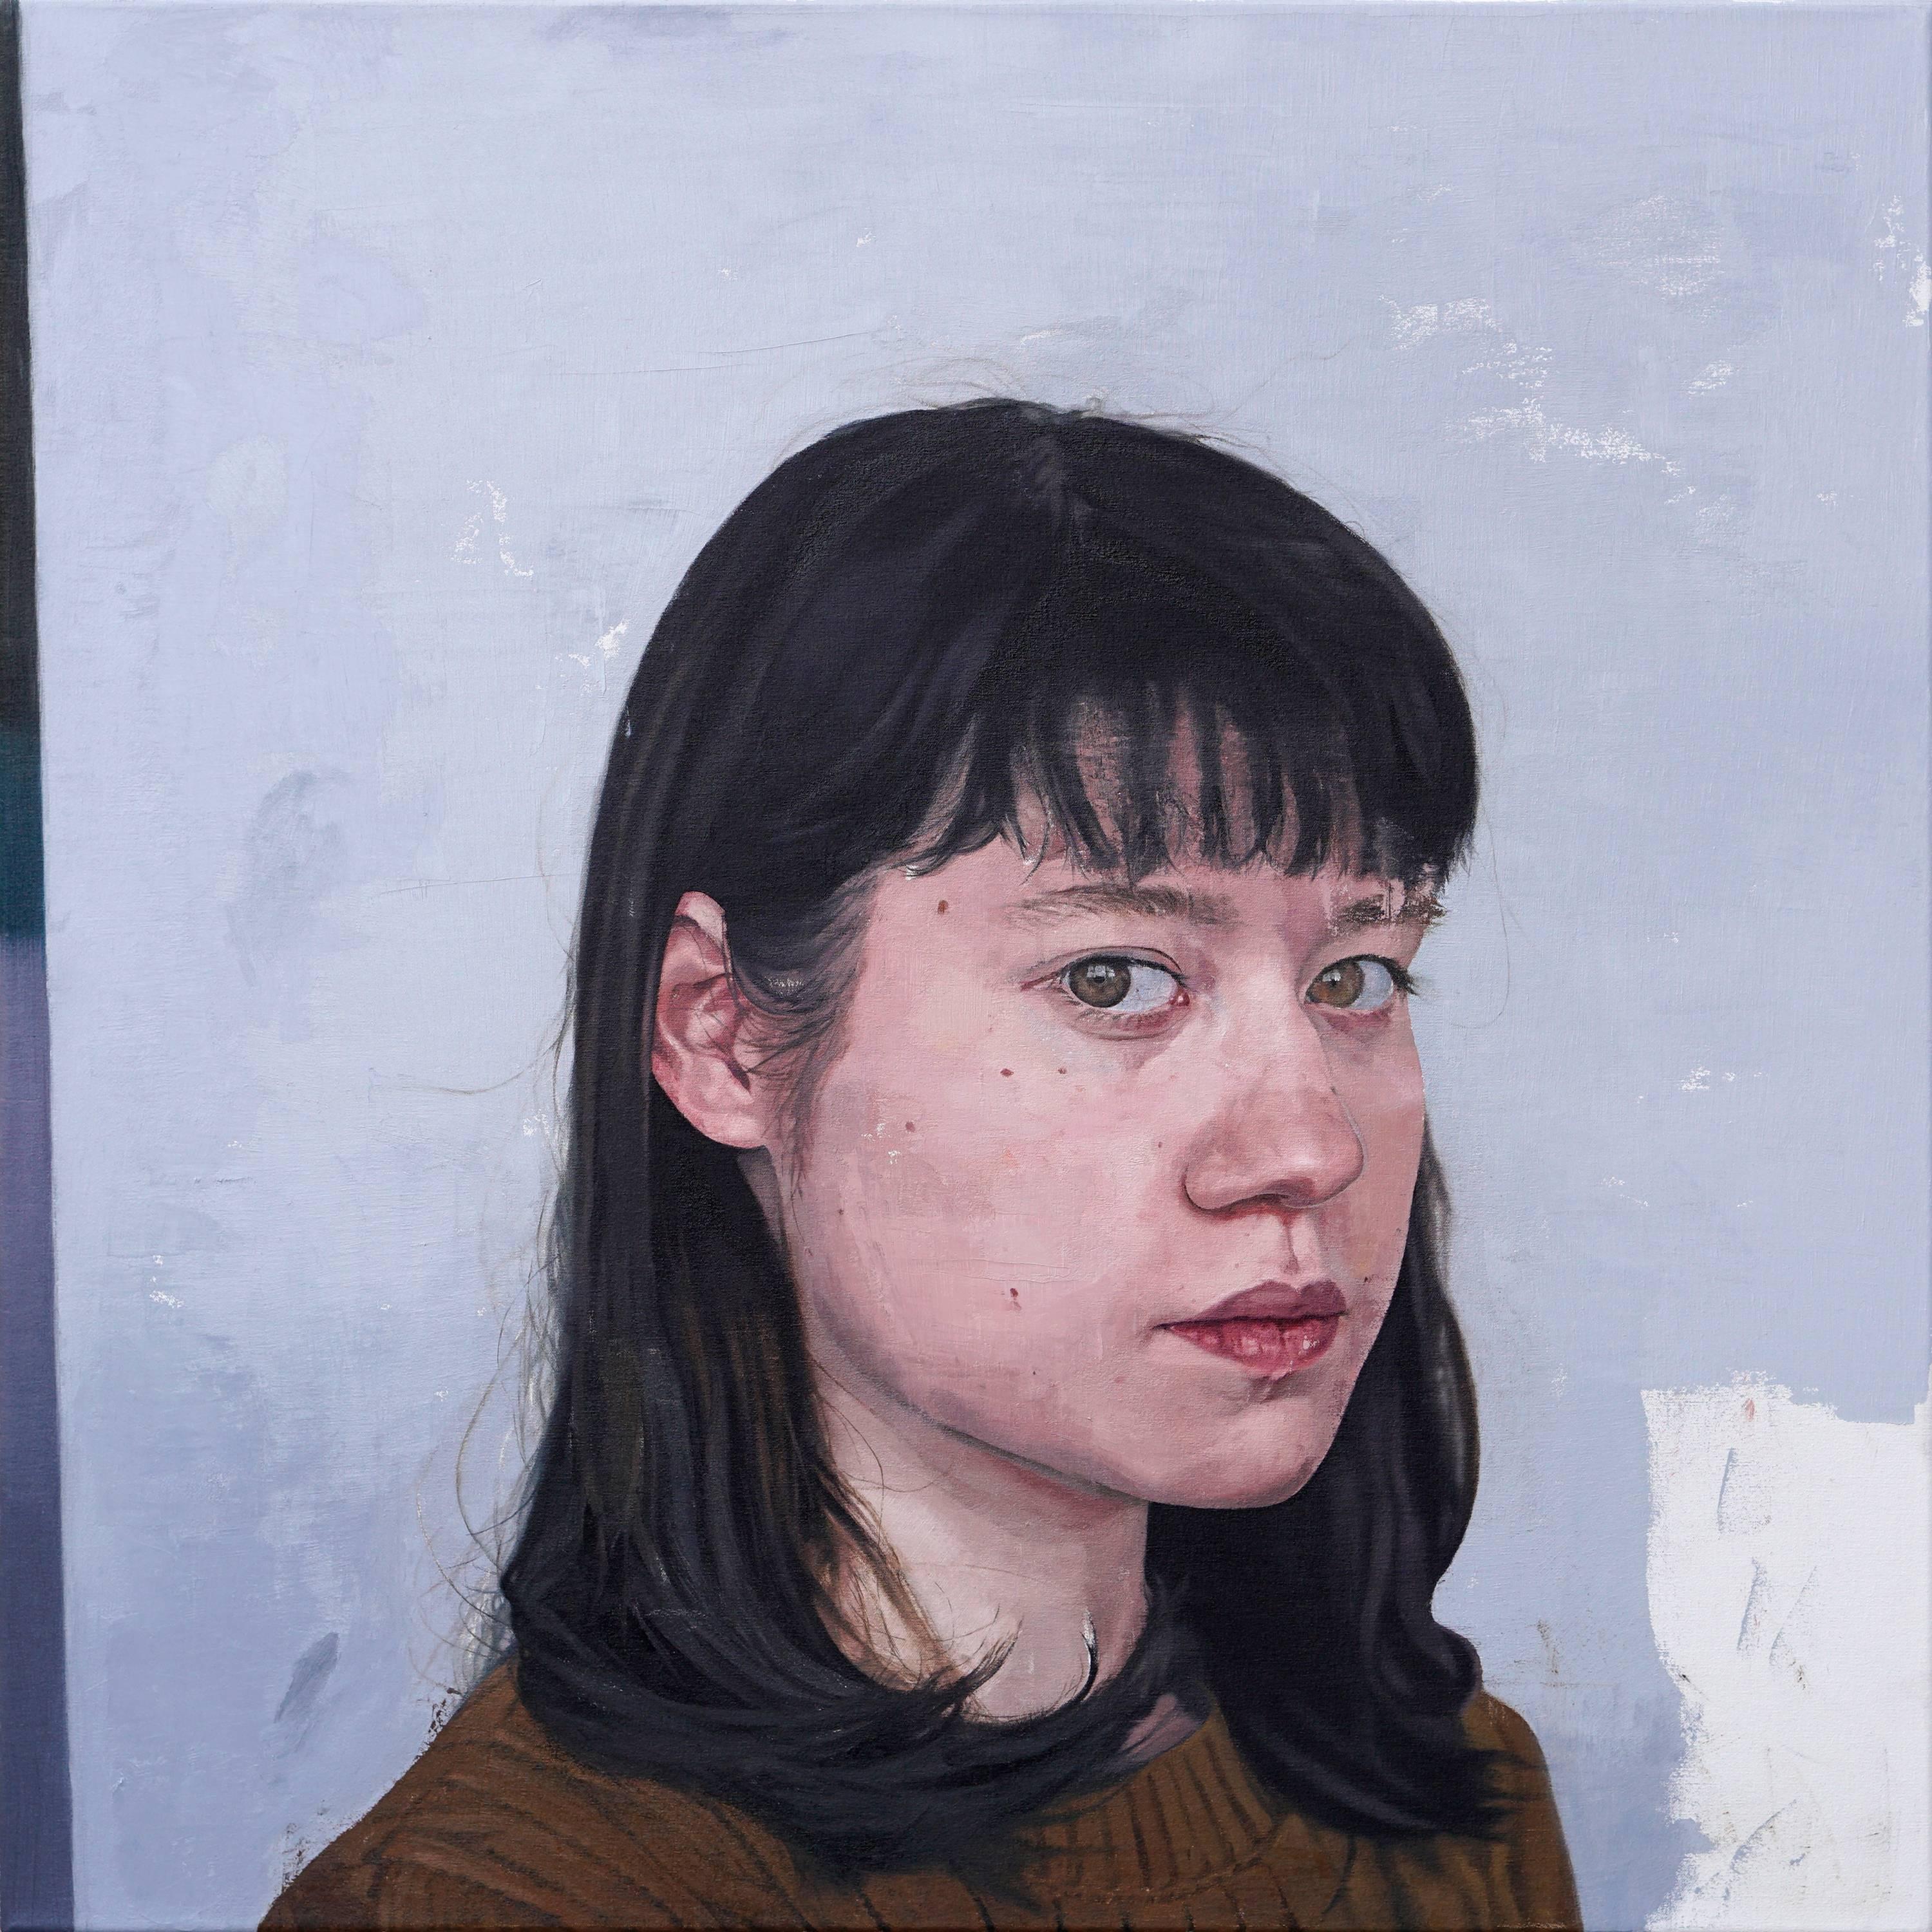 Park's "Untitled G" is large scale realist painting. The work features a head and shoulder portrait of a young woman with dark hair and bangs set against a light blue background.  She sits with her body angled towards the viewer and her forward gaze